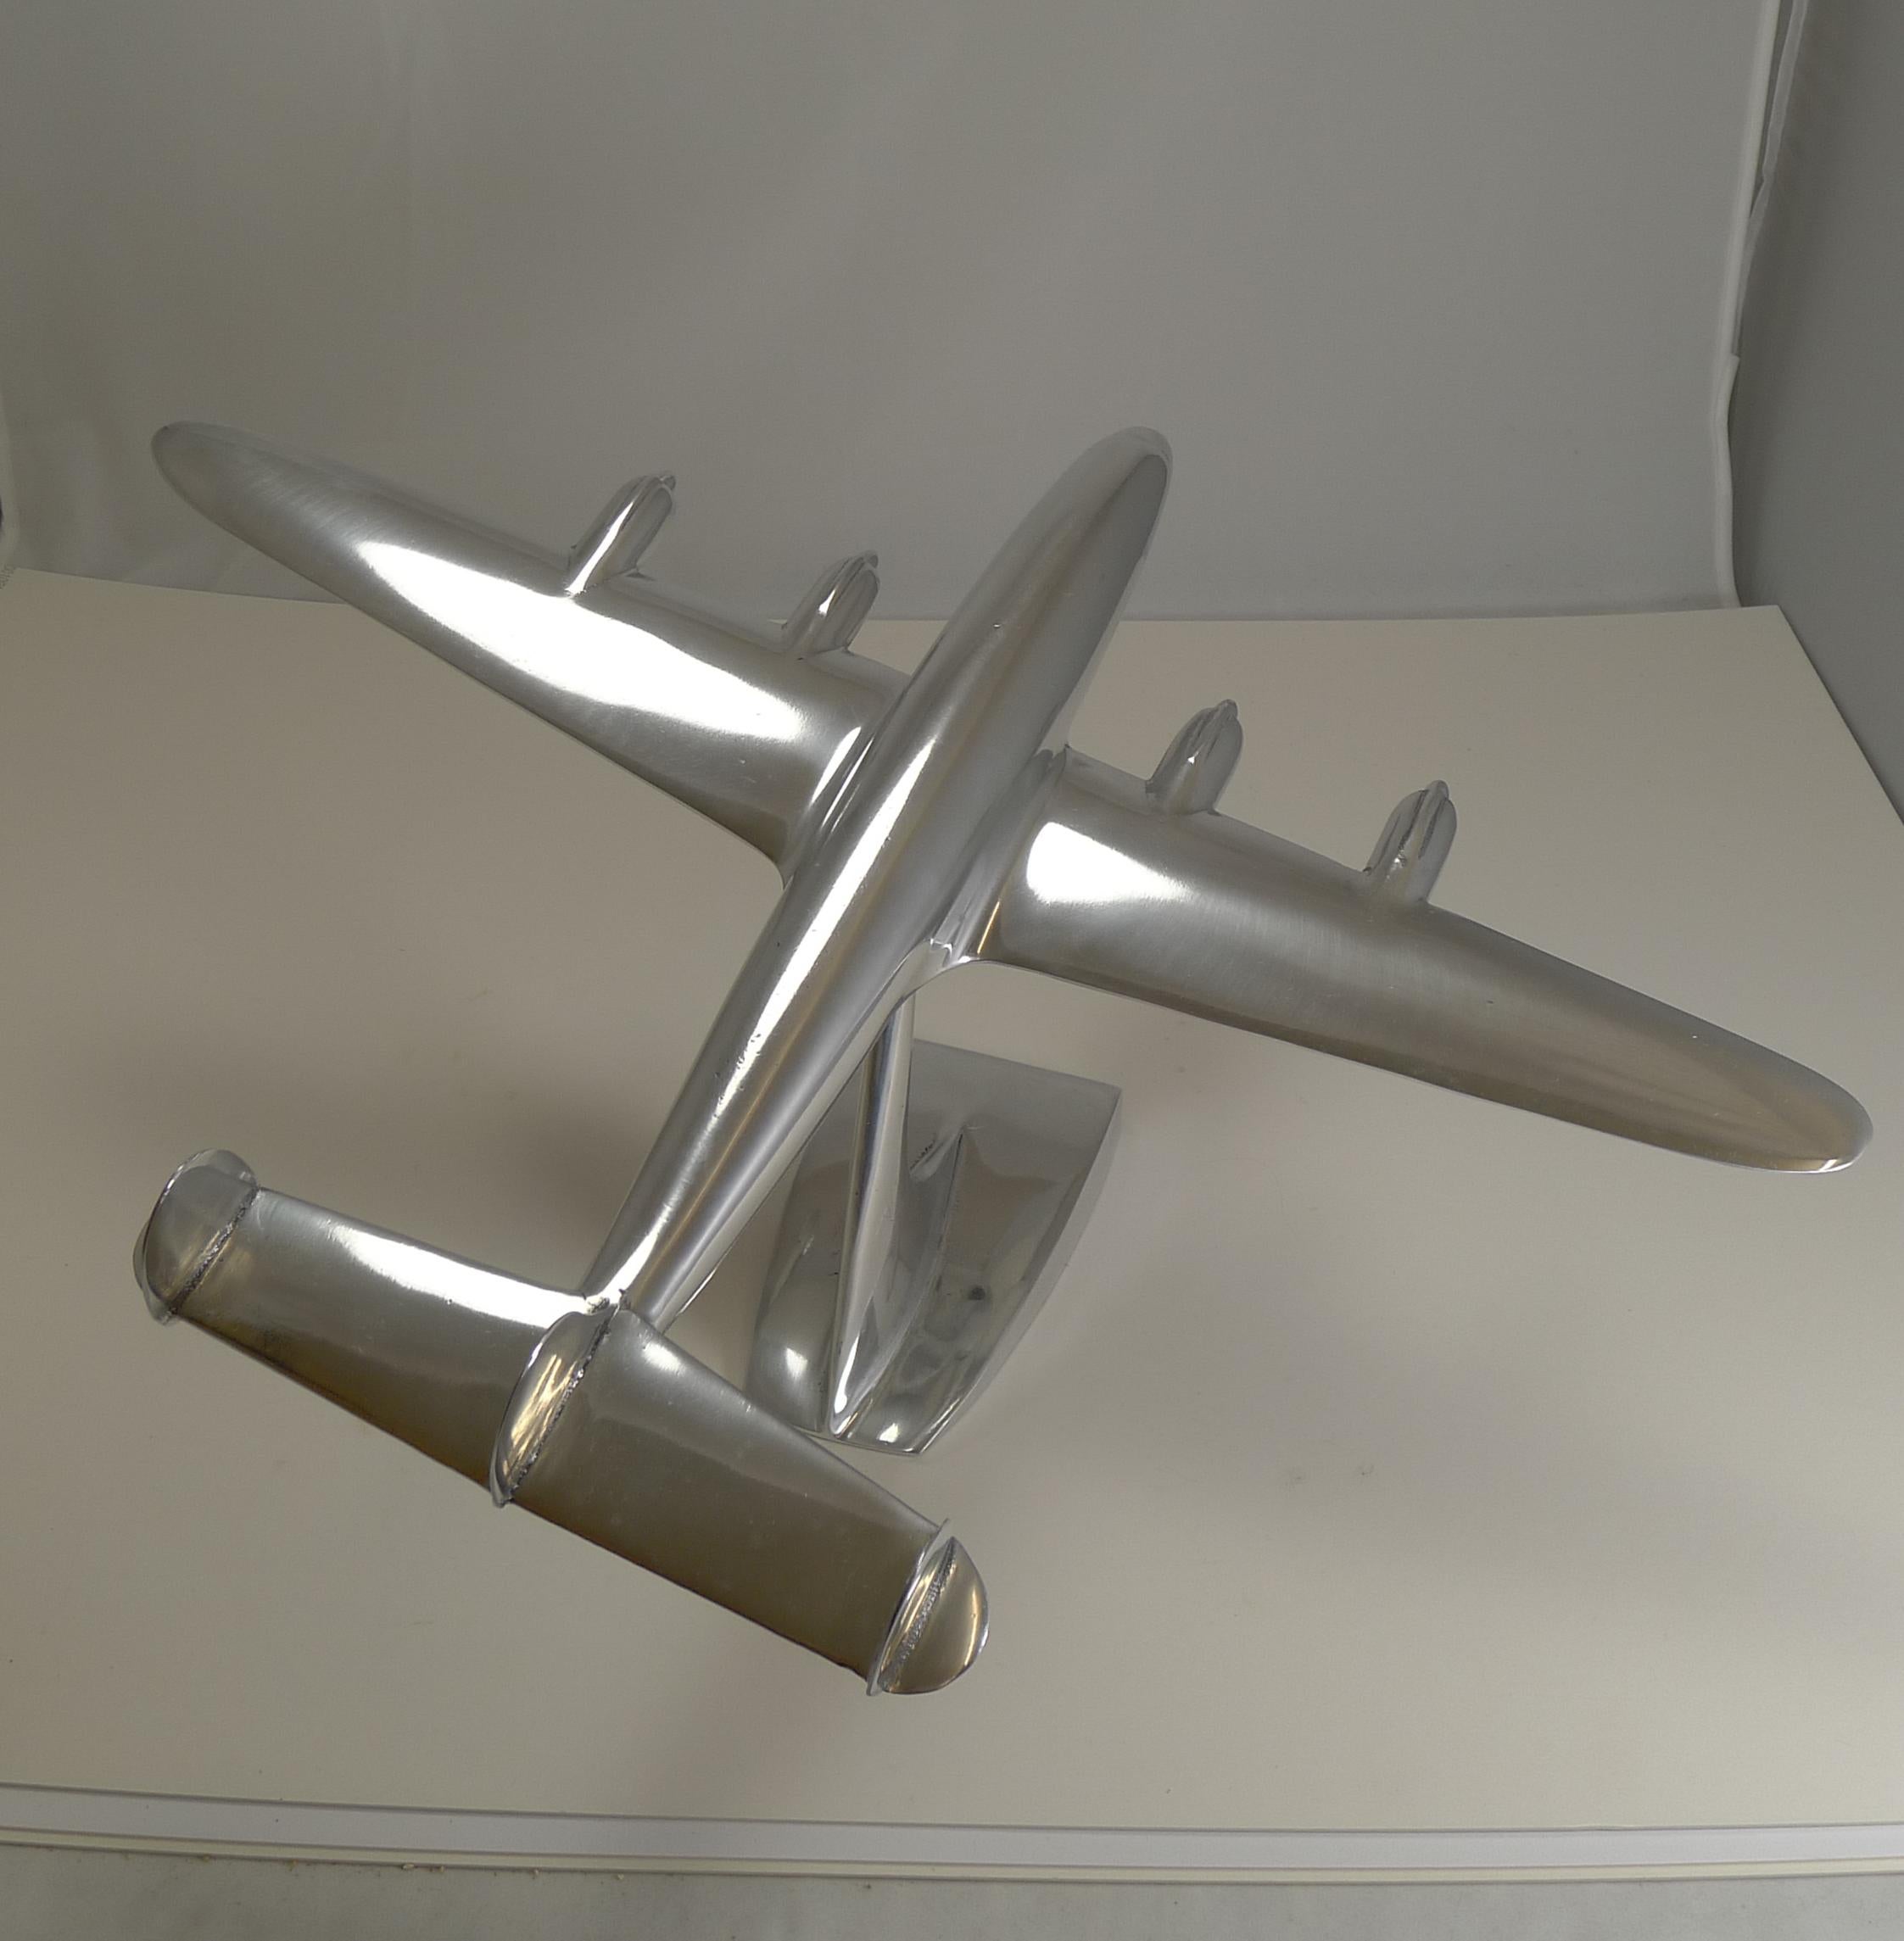 A handsome and highly collectable polished aluminium aircraft model on a stand.

The Lockheed Constellation (